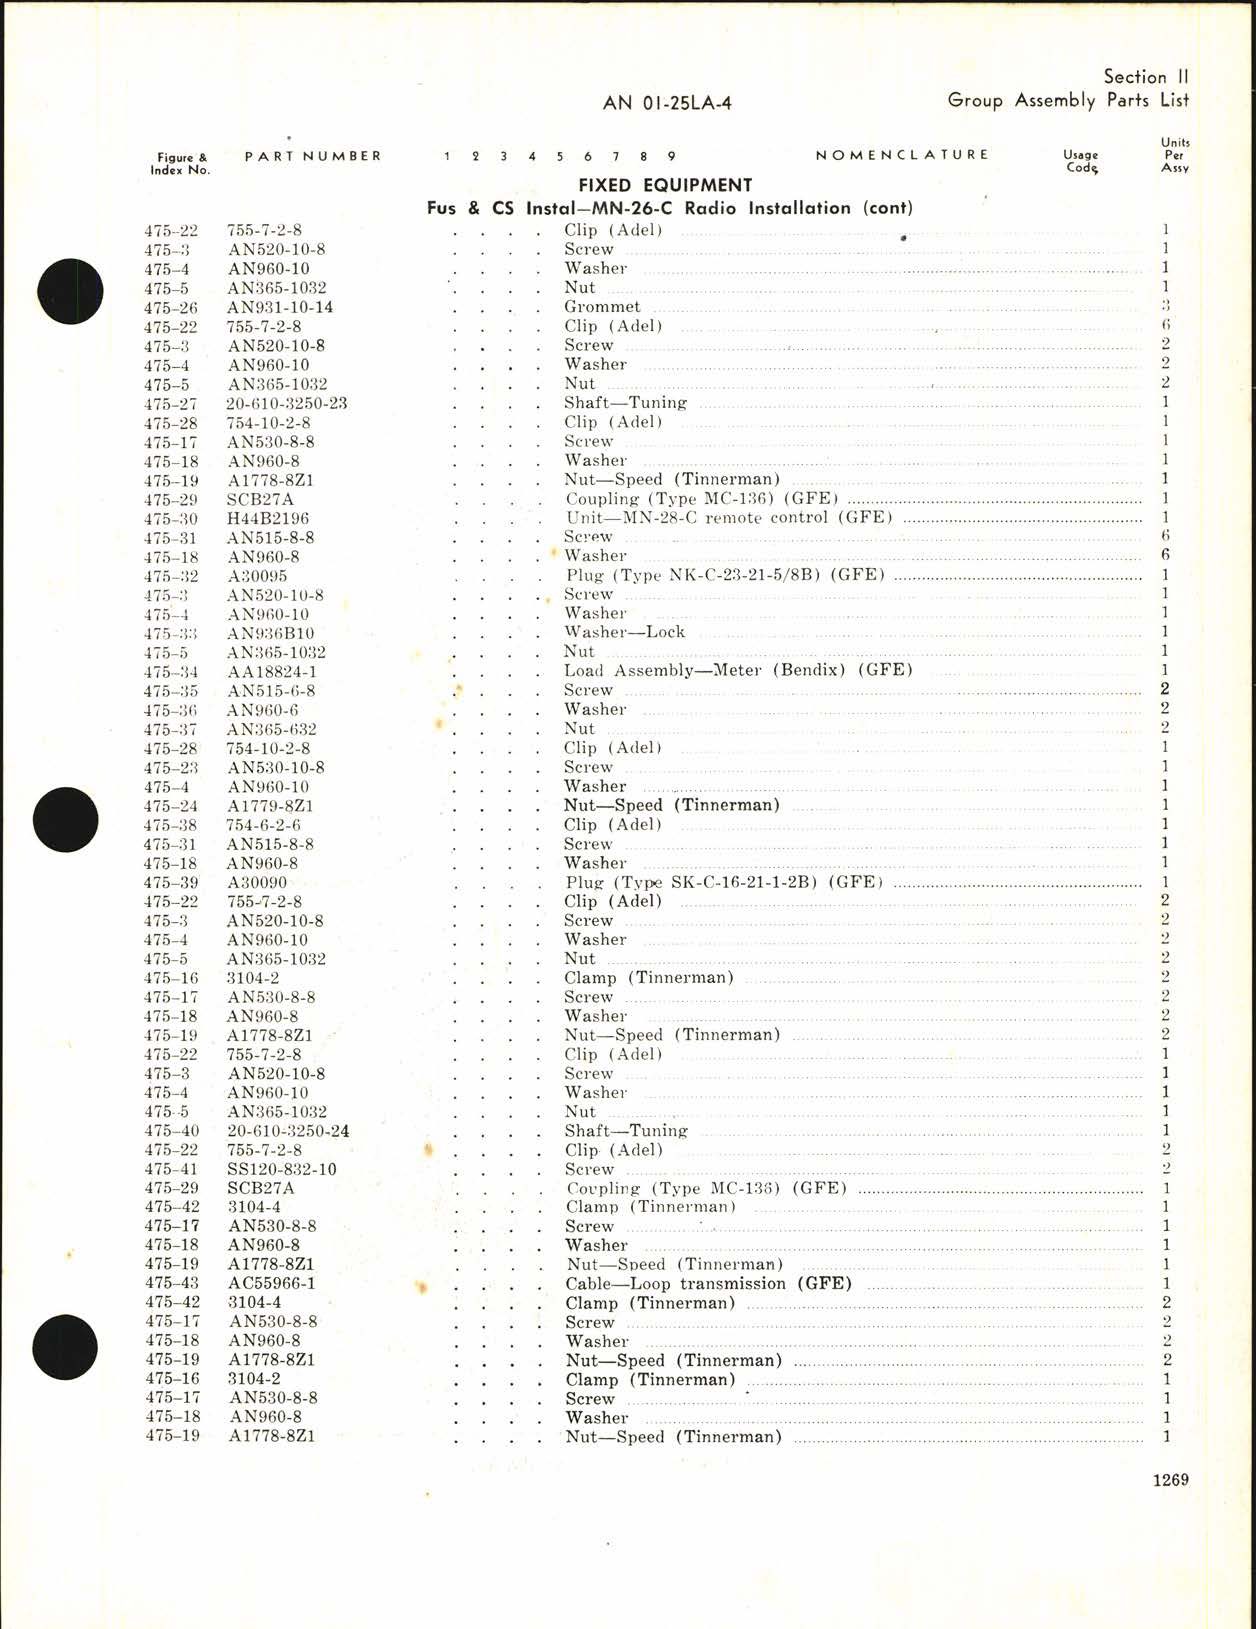 Sample page 7 from AirCorps Library document: Parts Catalog for C-46A, C-46D, and R5C-1